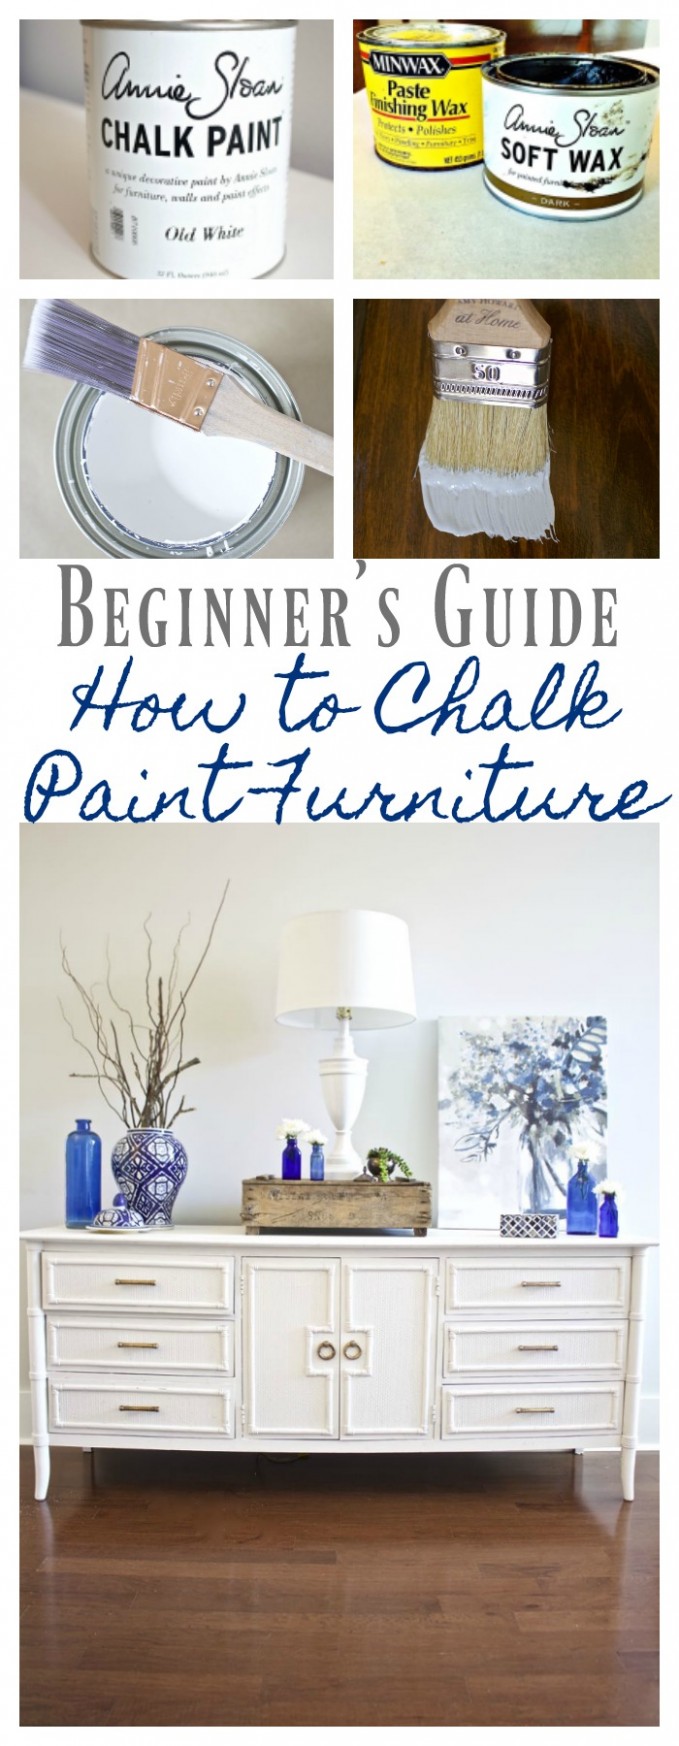 How To Chalk Paint Furniture Our Best Tips 6 Bees In A Pod Annie Sloan Chalk Paint How To Use